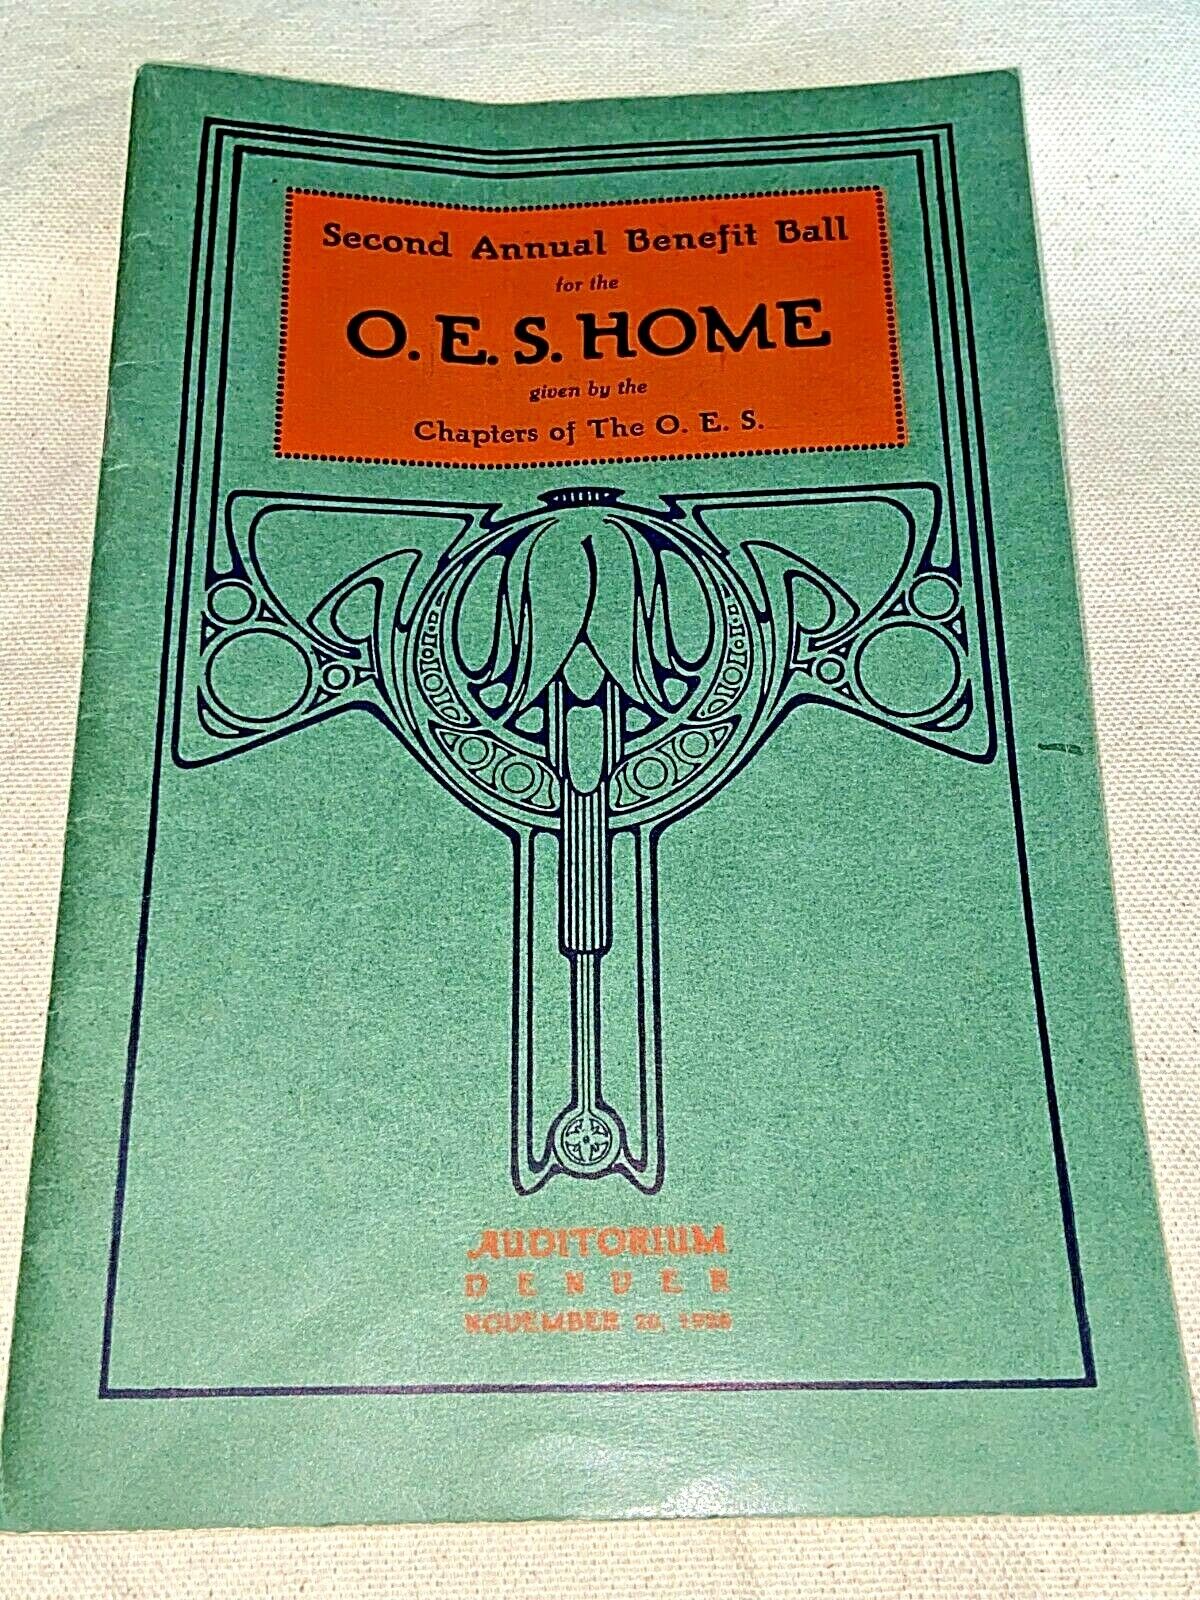 Second Annual Benefit Ball Program O.E.S. Home 1926 ~ Order of the Eastern Star